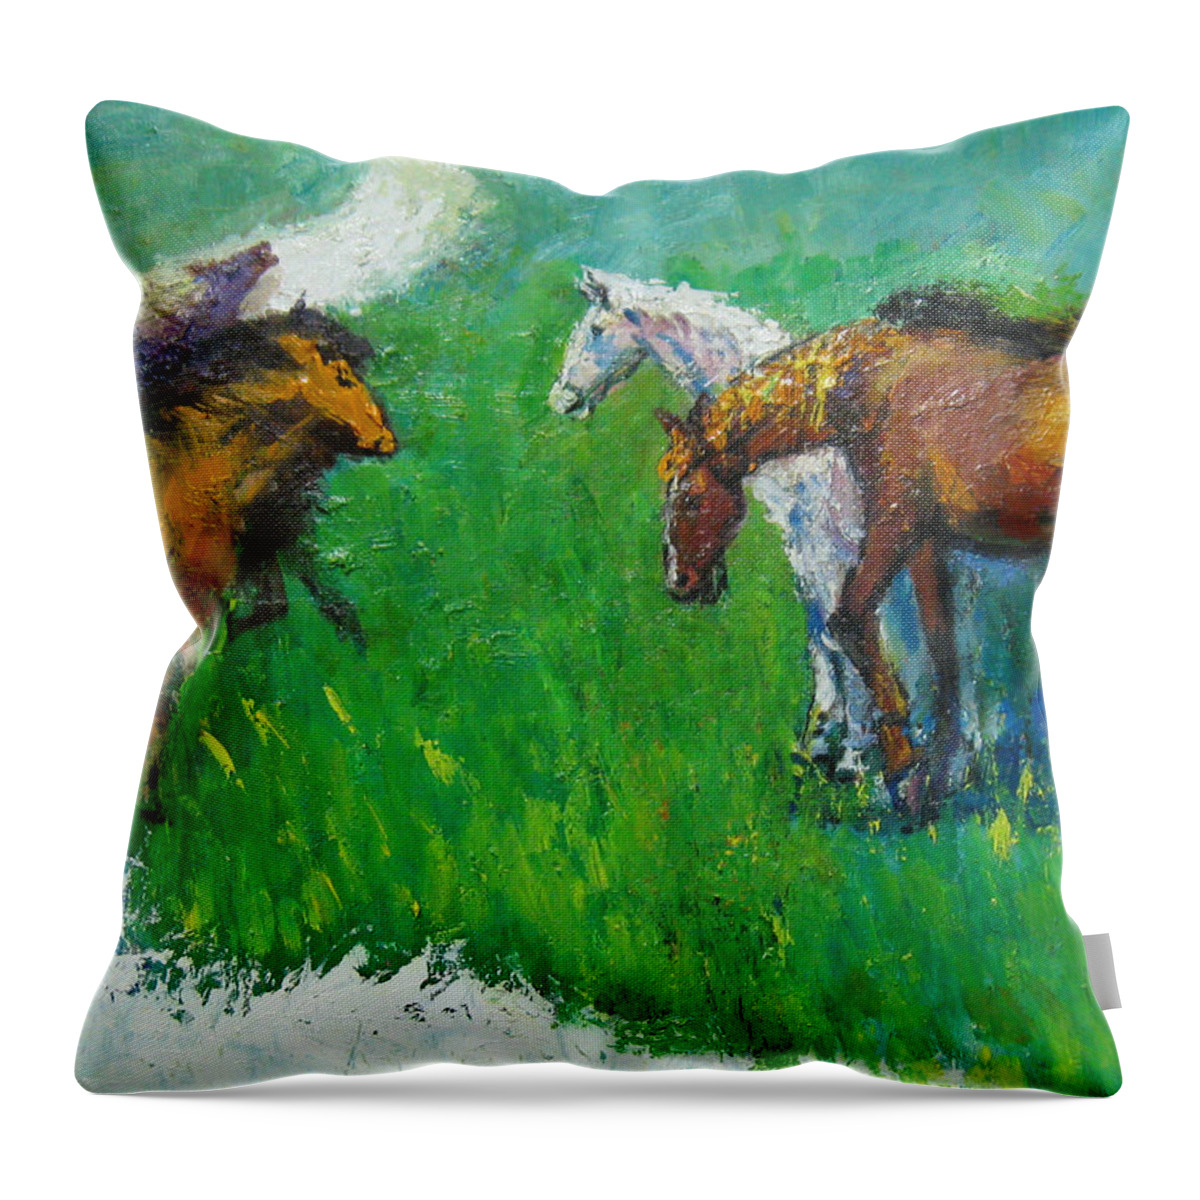 Horses Throw Pillow featuring the painting Horses by Guanyu Shi